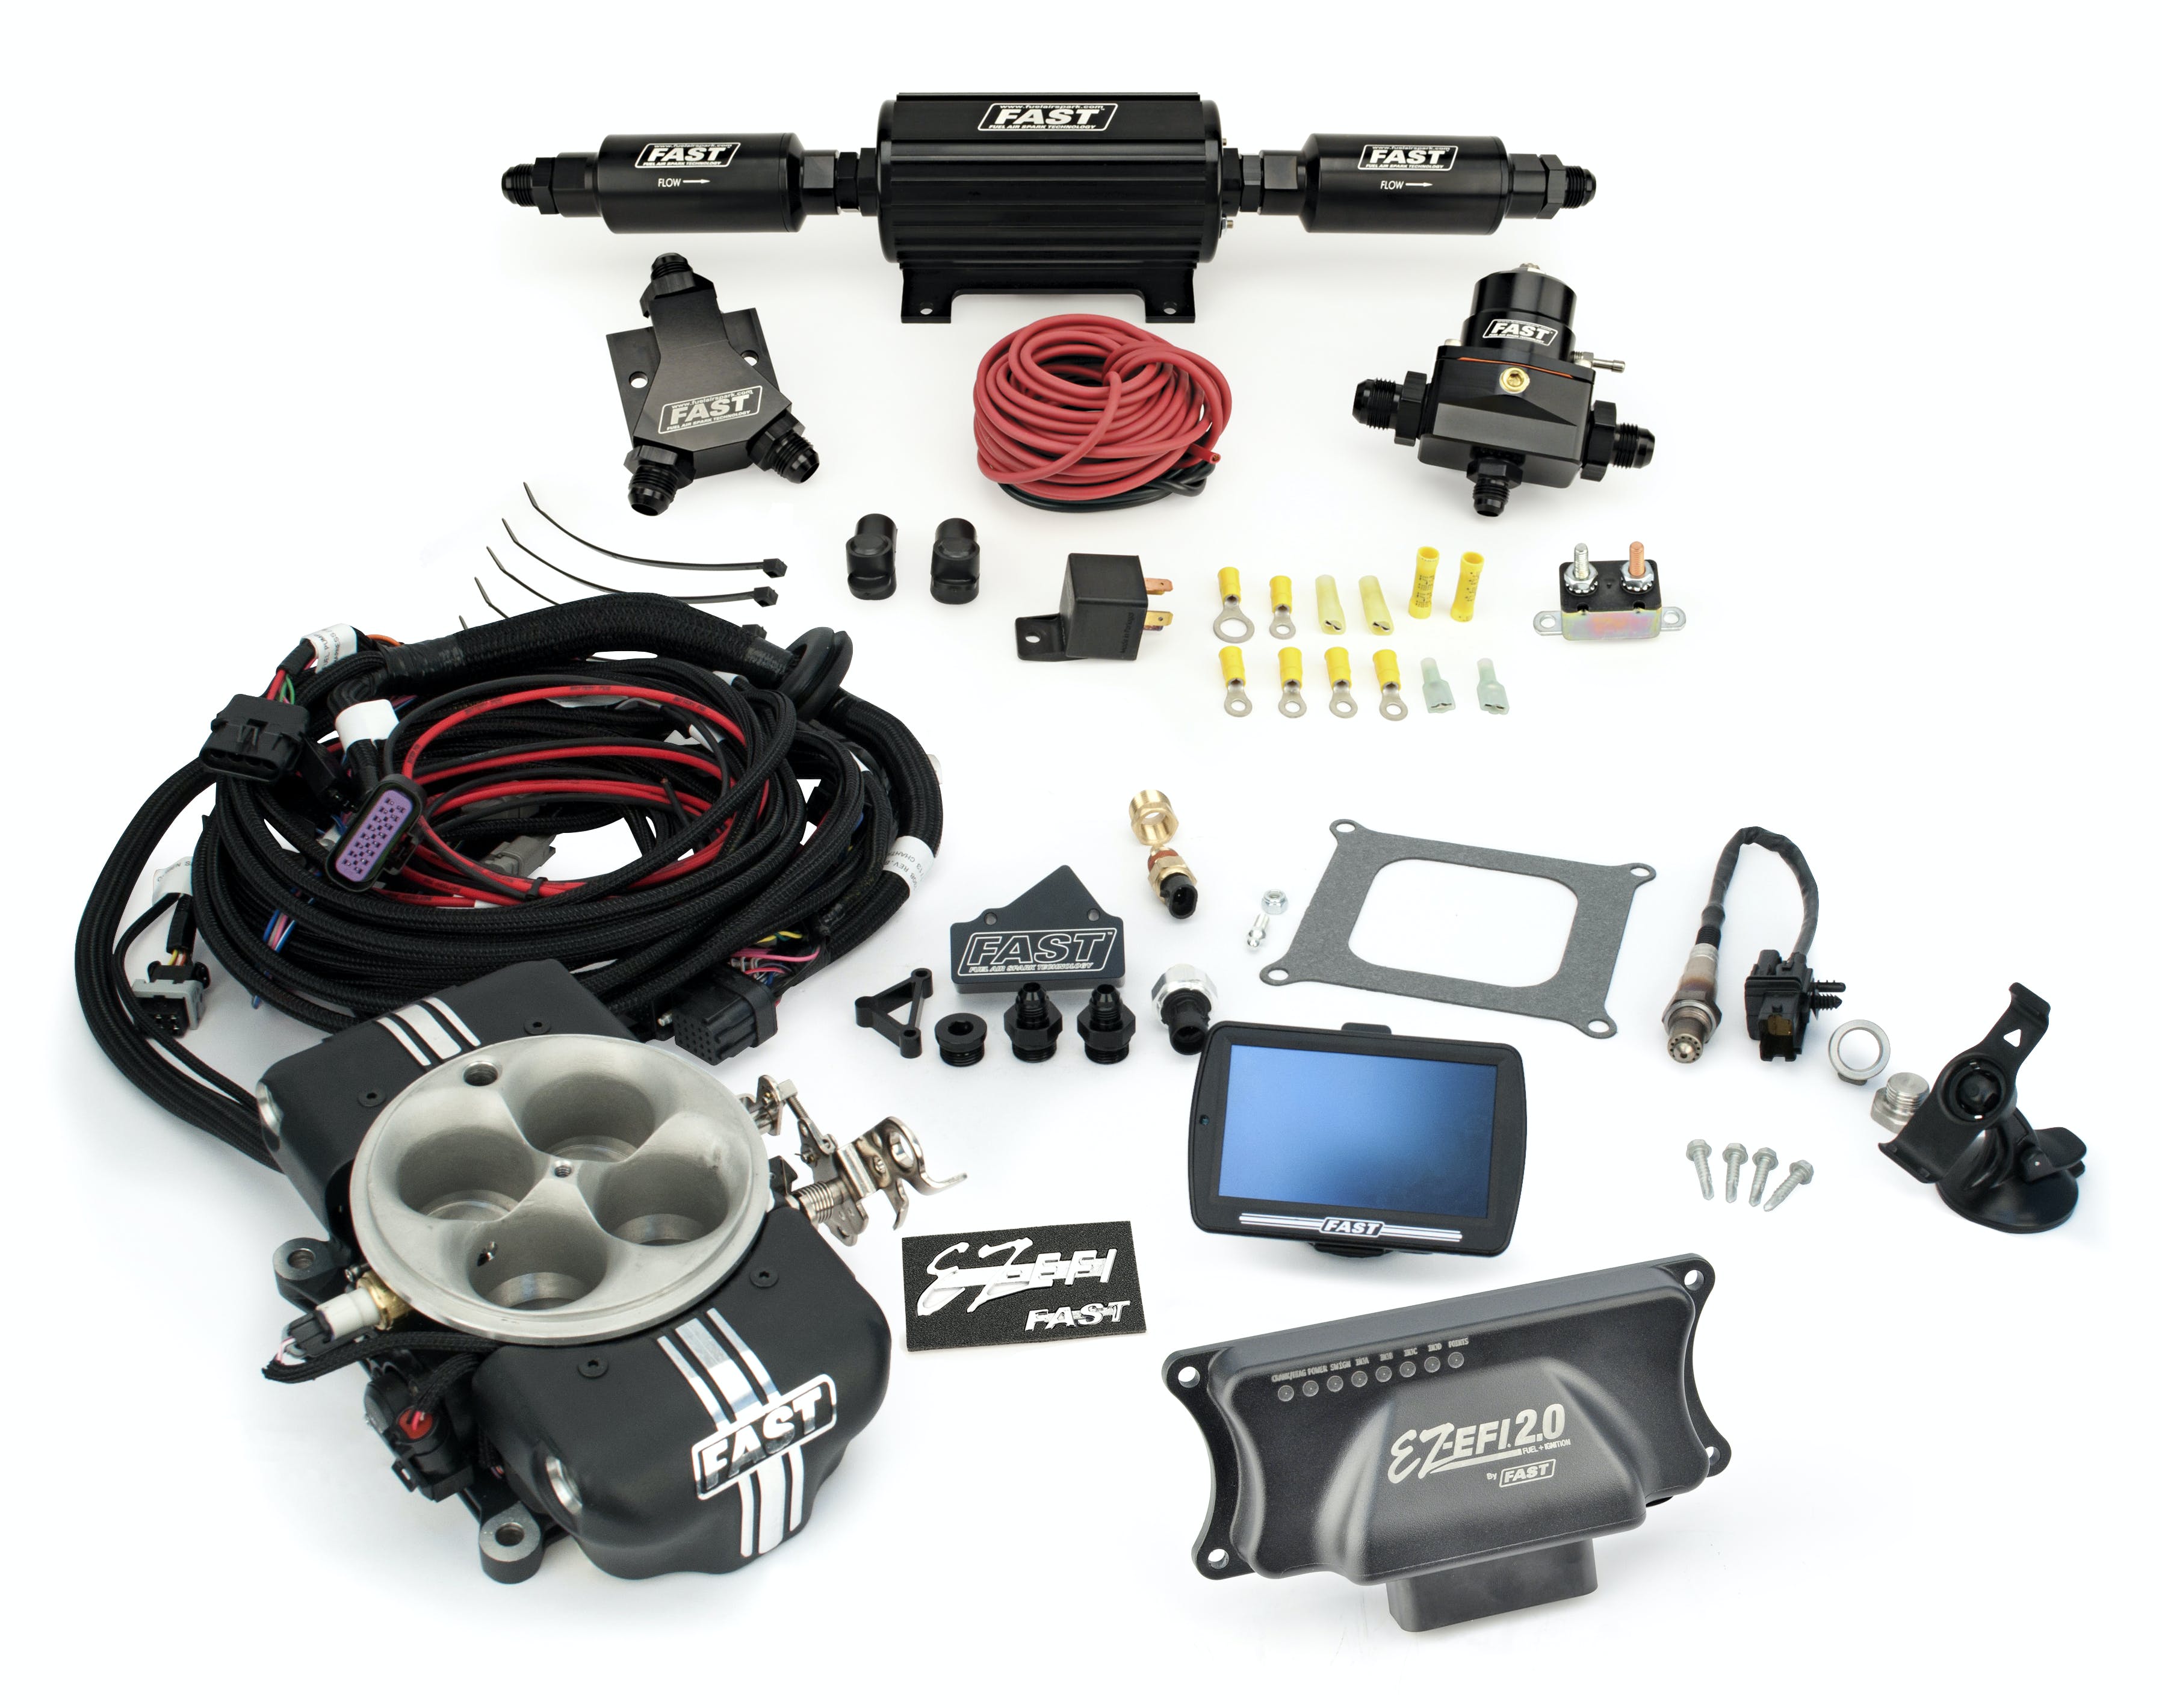 FAST - Fuel Air Spark Technology 30403-KIT EZ 2.0 Base Kit with Touchscreen, Throttle Body and Inline Pump Kit